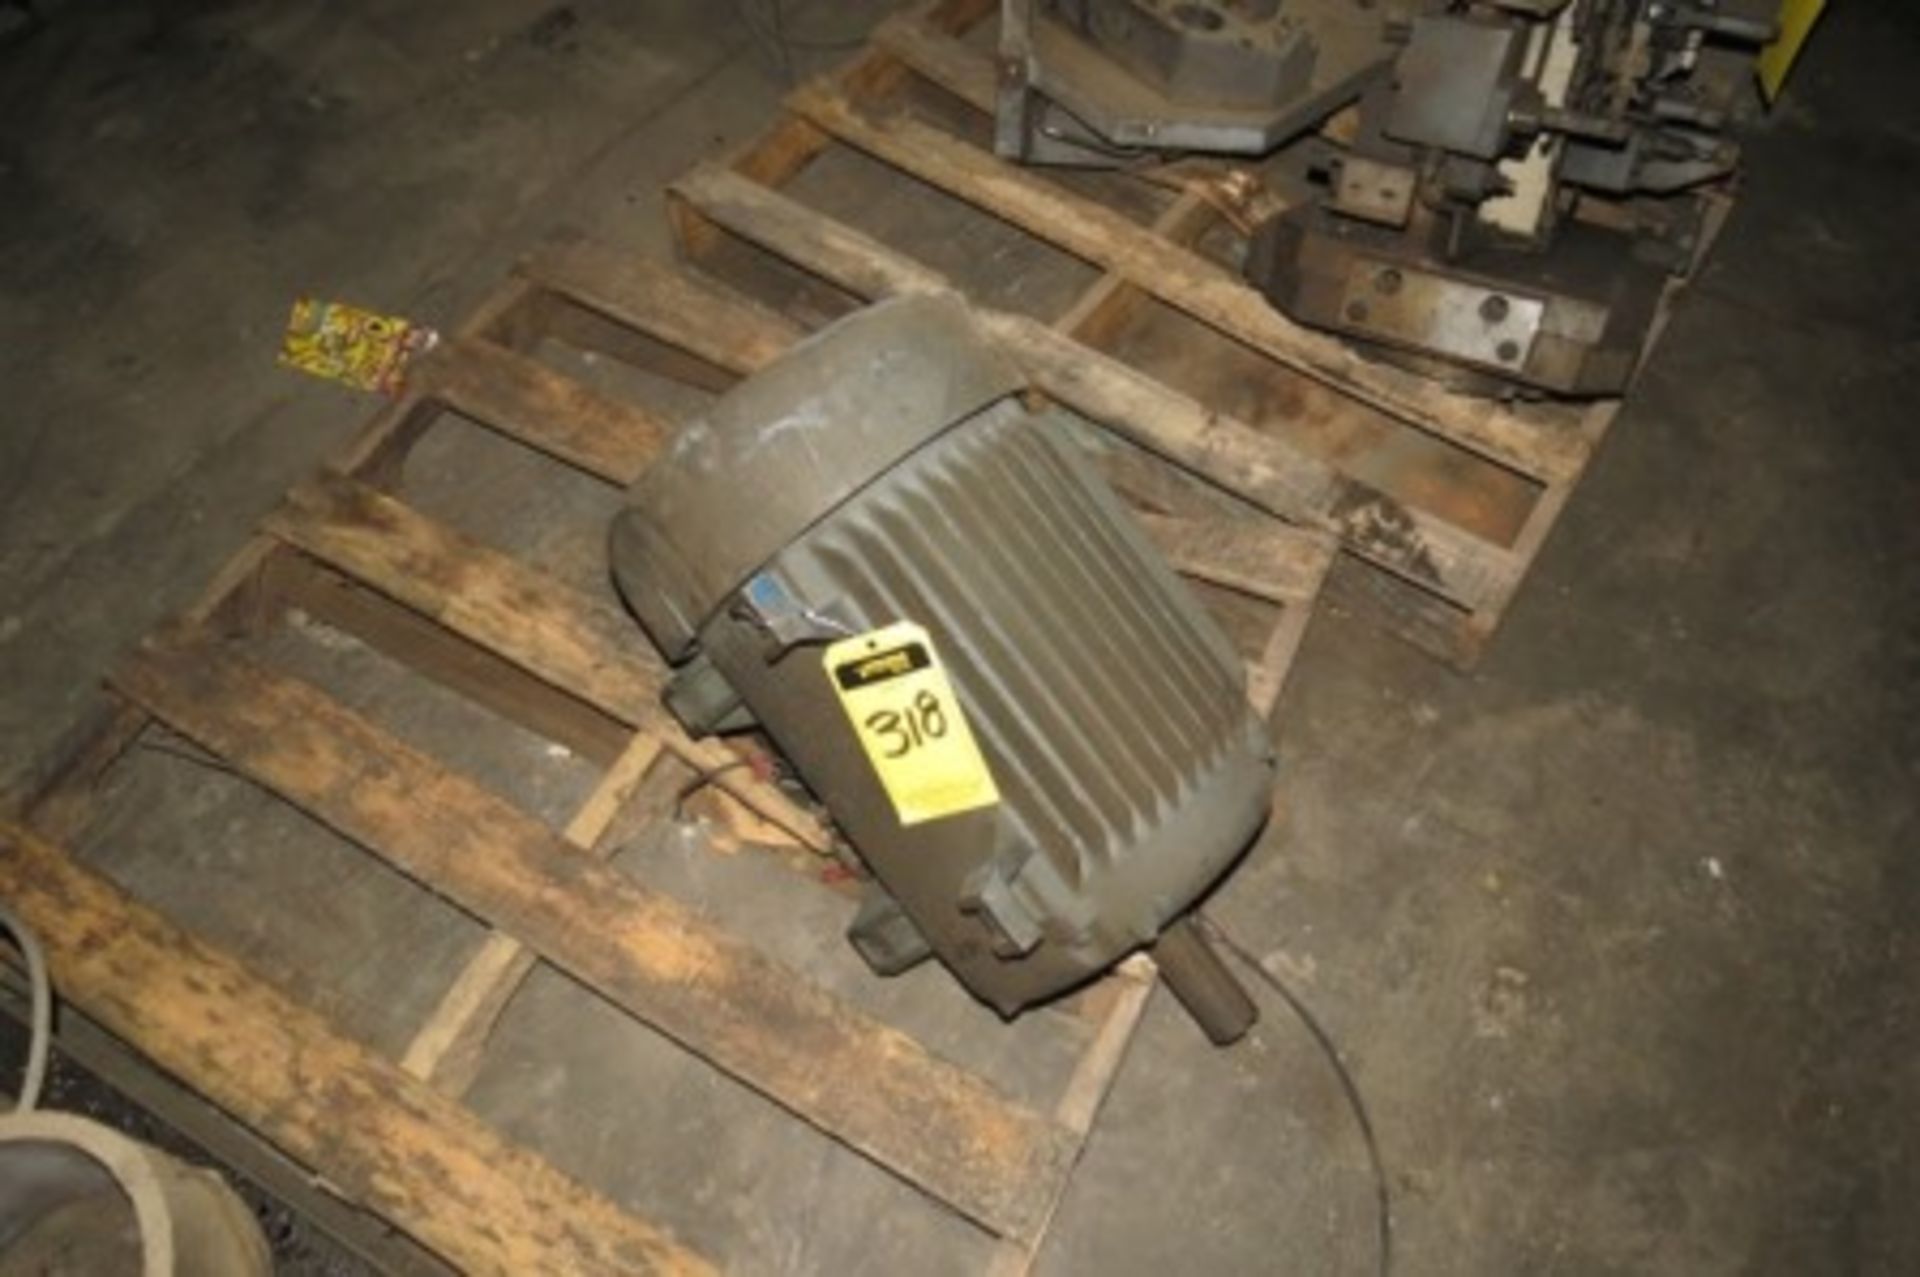 Electric motor 50 hp. Spare parts for die casting machines. Belt conveyor - Image 2 of 19